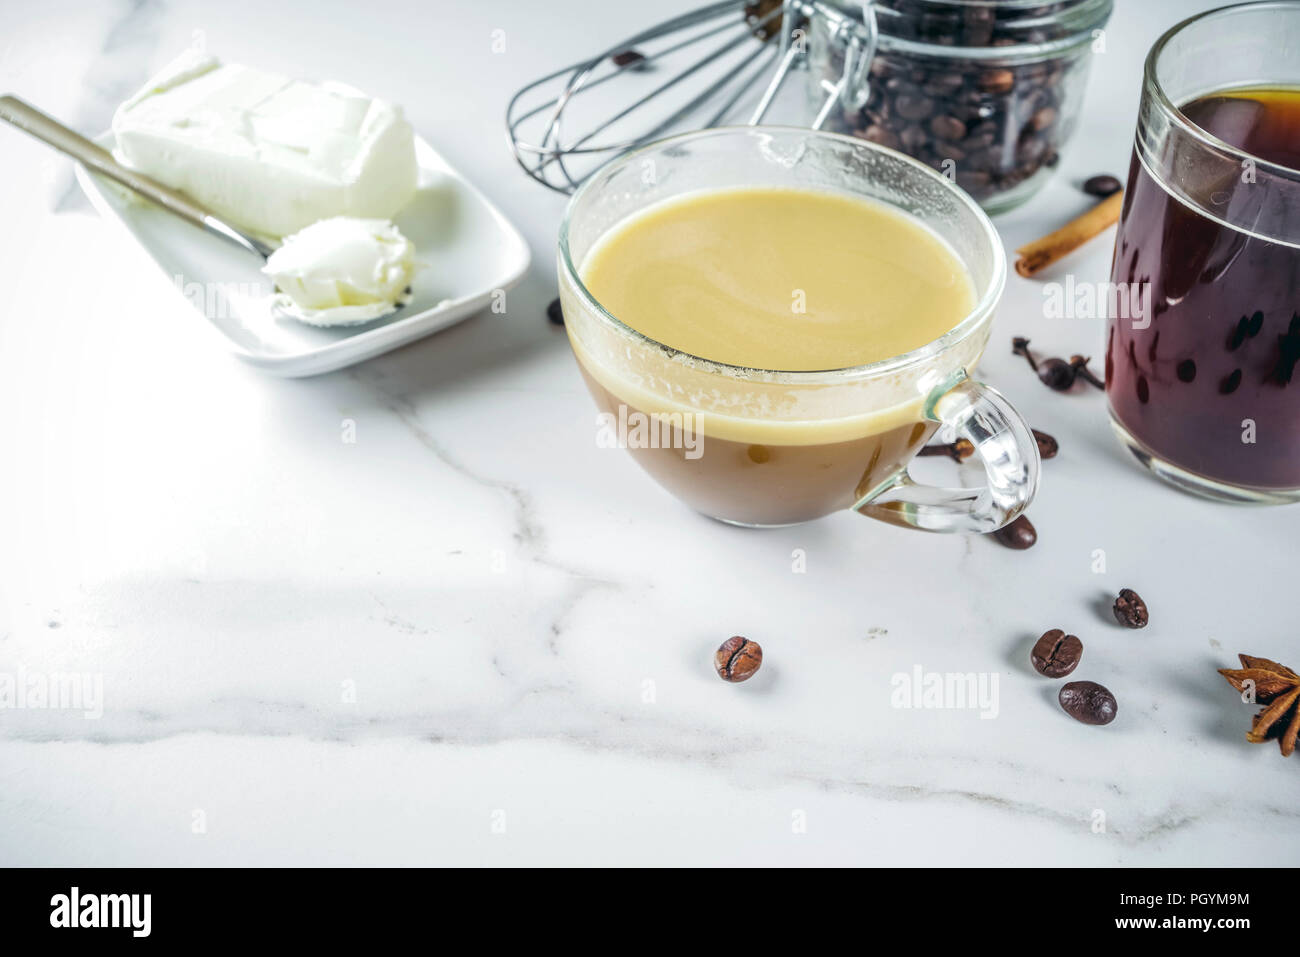 Trendy ketogenic diet food, Bulletproof coffee with milk and butter, white marble background copy space Stock Photo